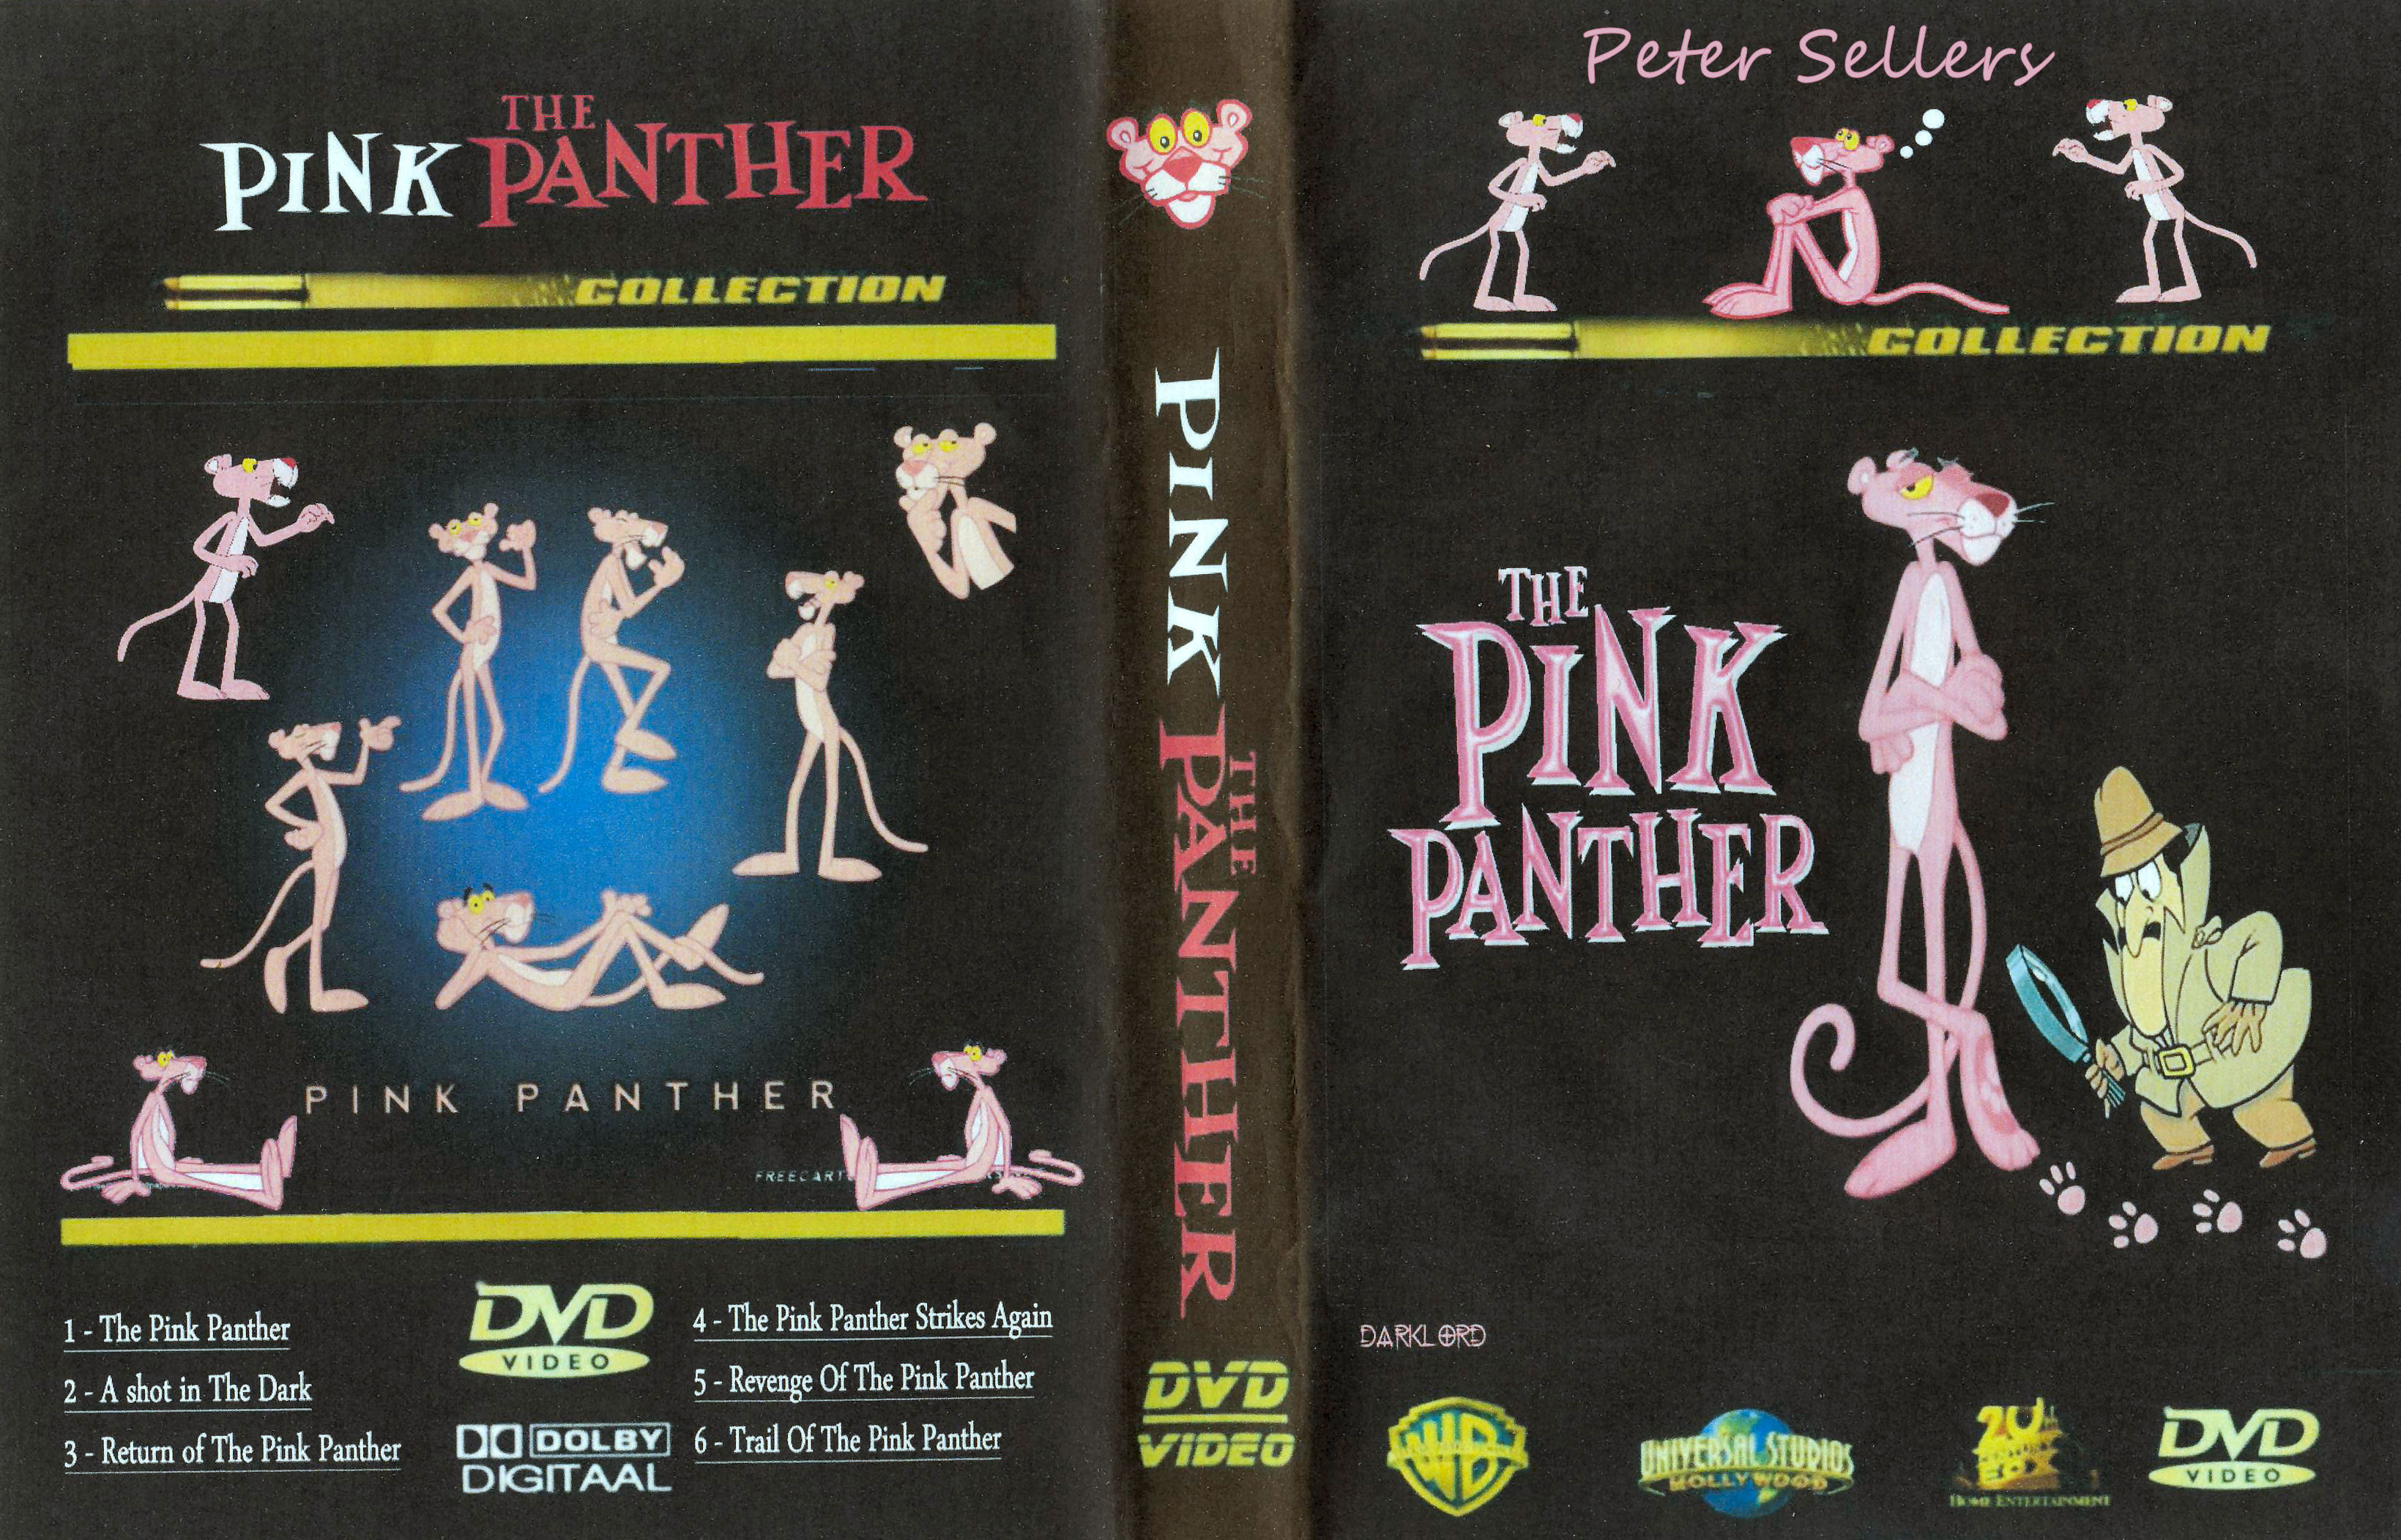 The Pink Panther Collectie (Peter Sellers) - DvD 1